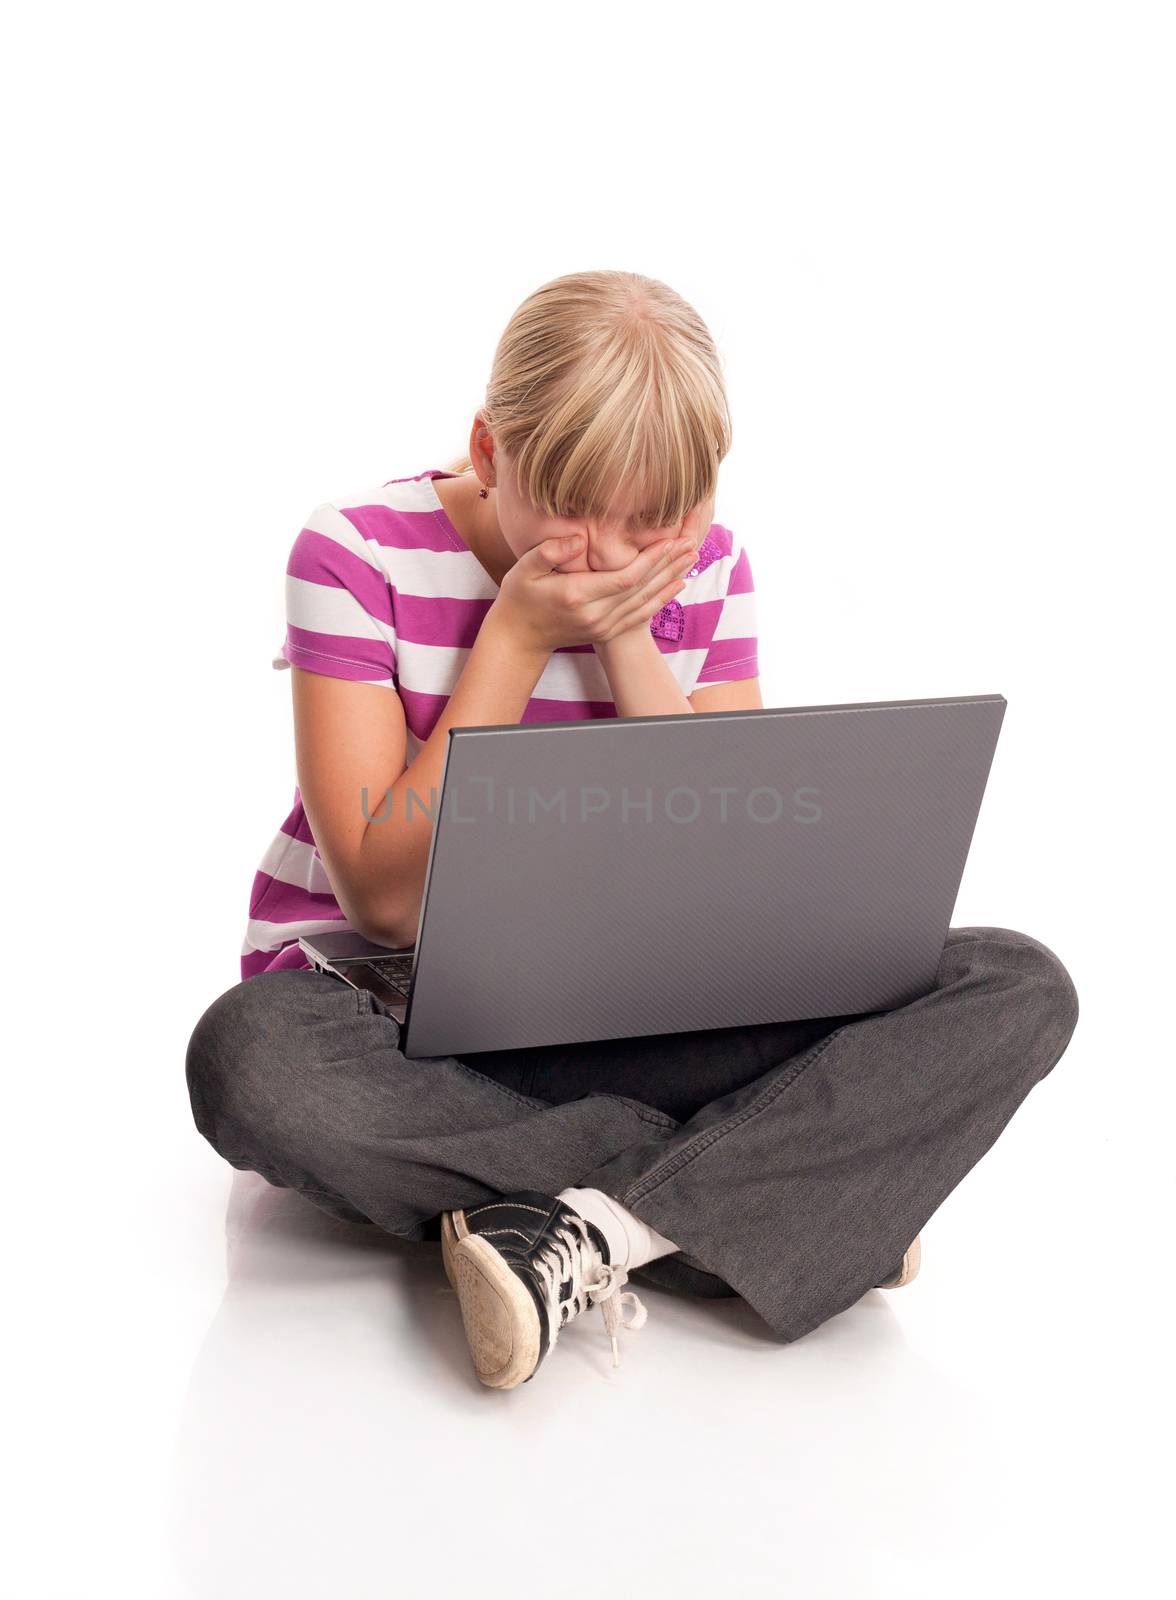 Young girl sitting on the floor and expressing negativcity emotions when using laptop